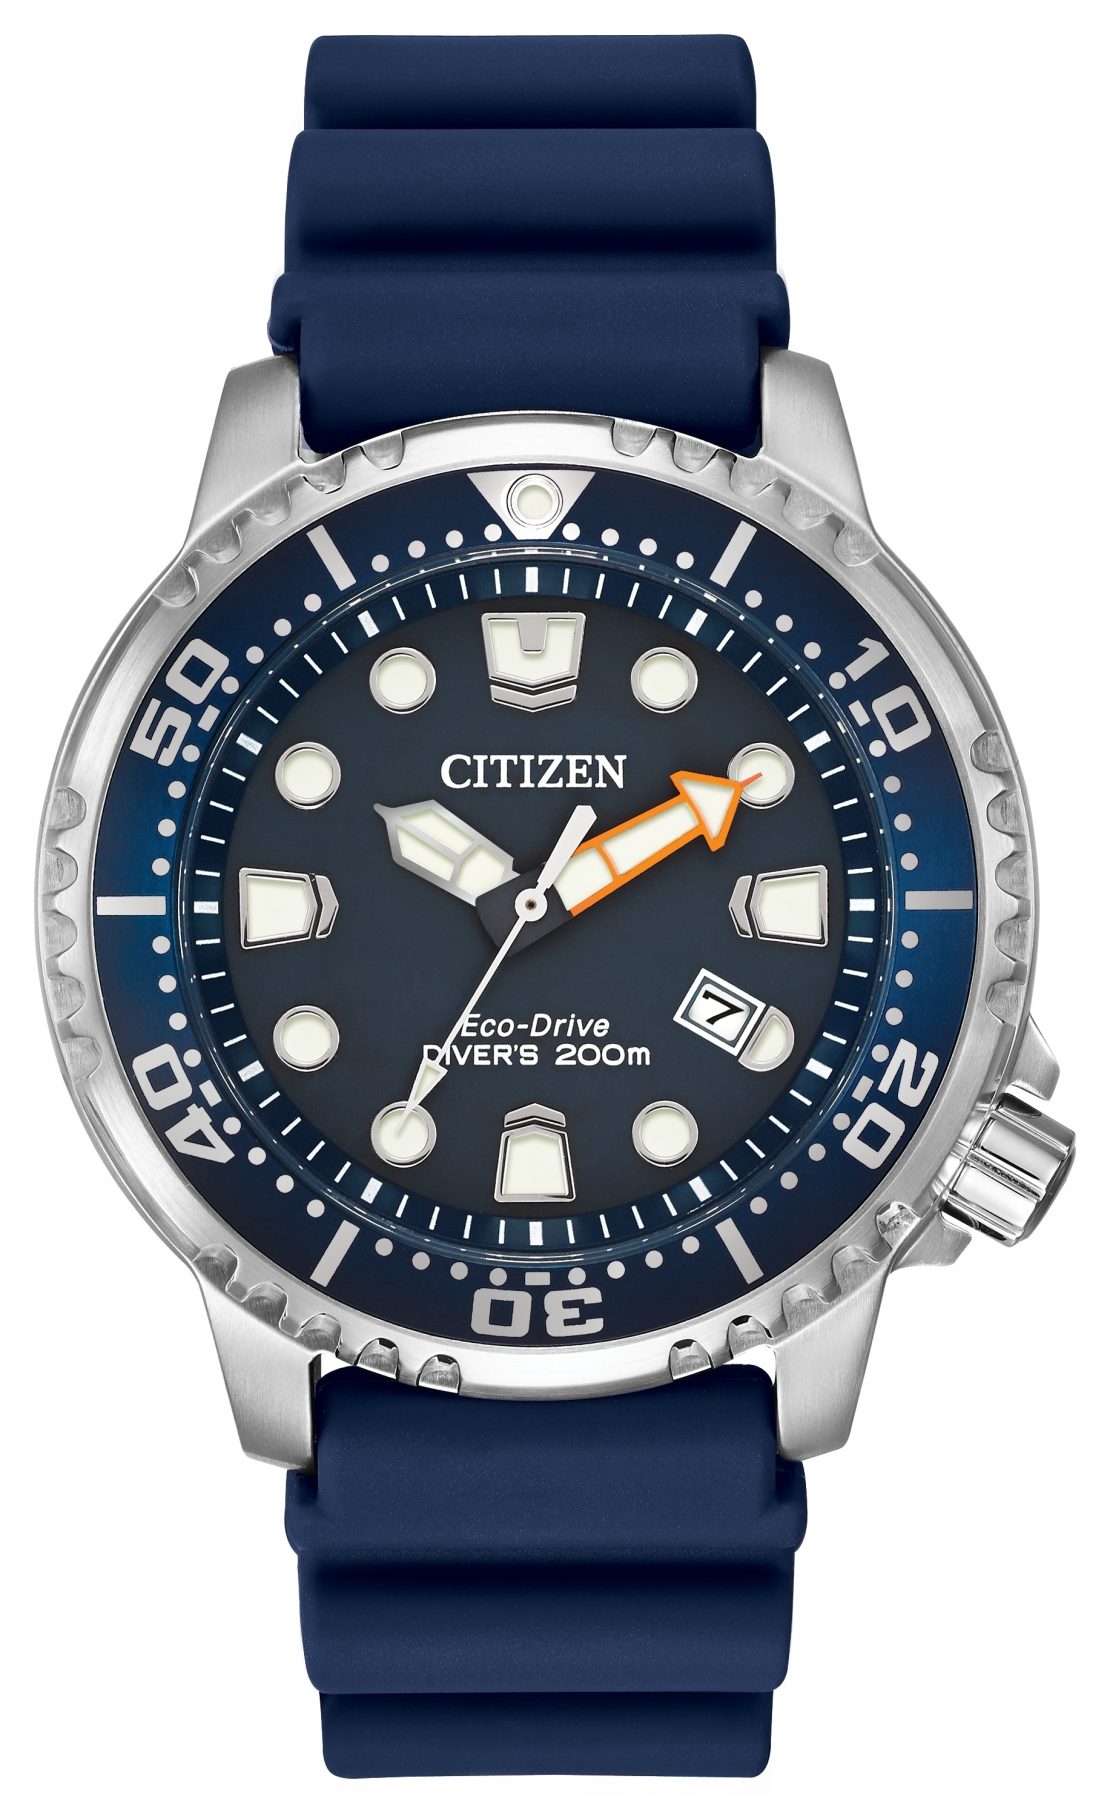 Citizen Eco Drive Watches – The Secret To Never Buying Another Watch